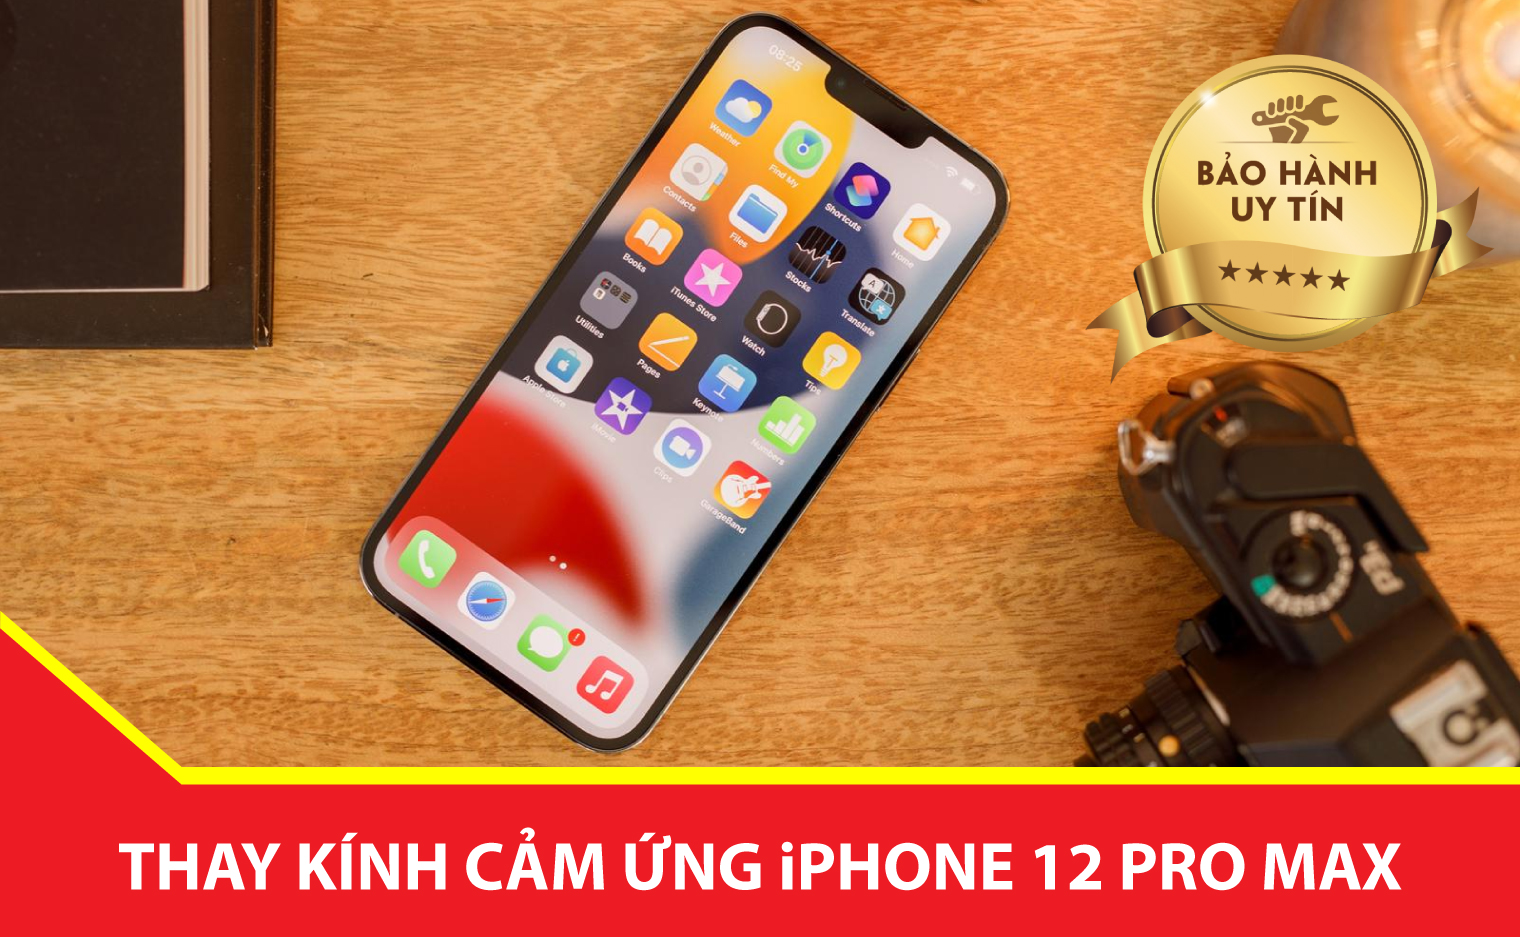 thay kinh cam ung iphone 12 pro max